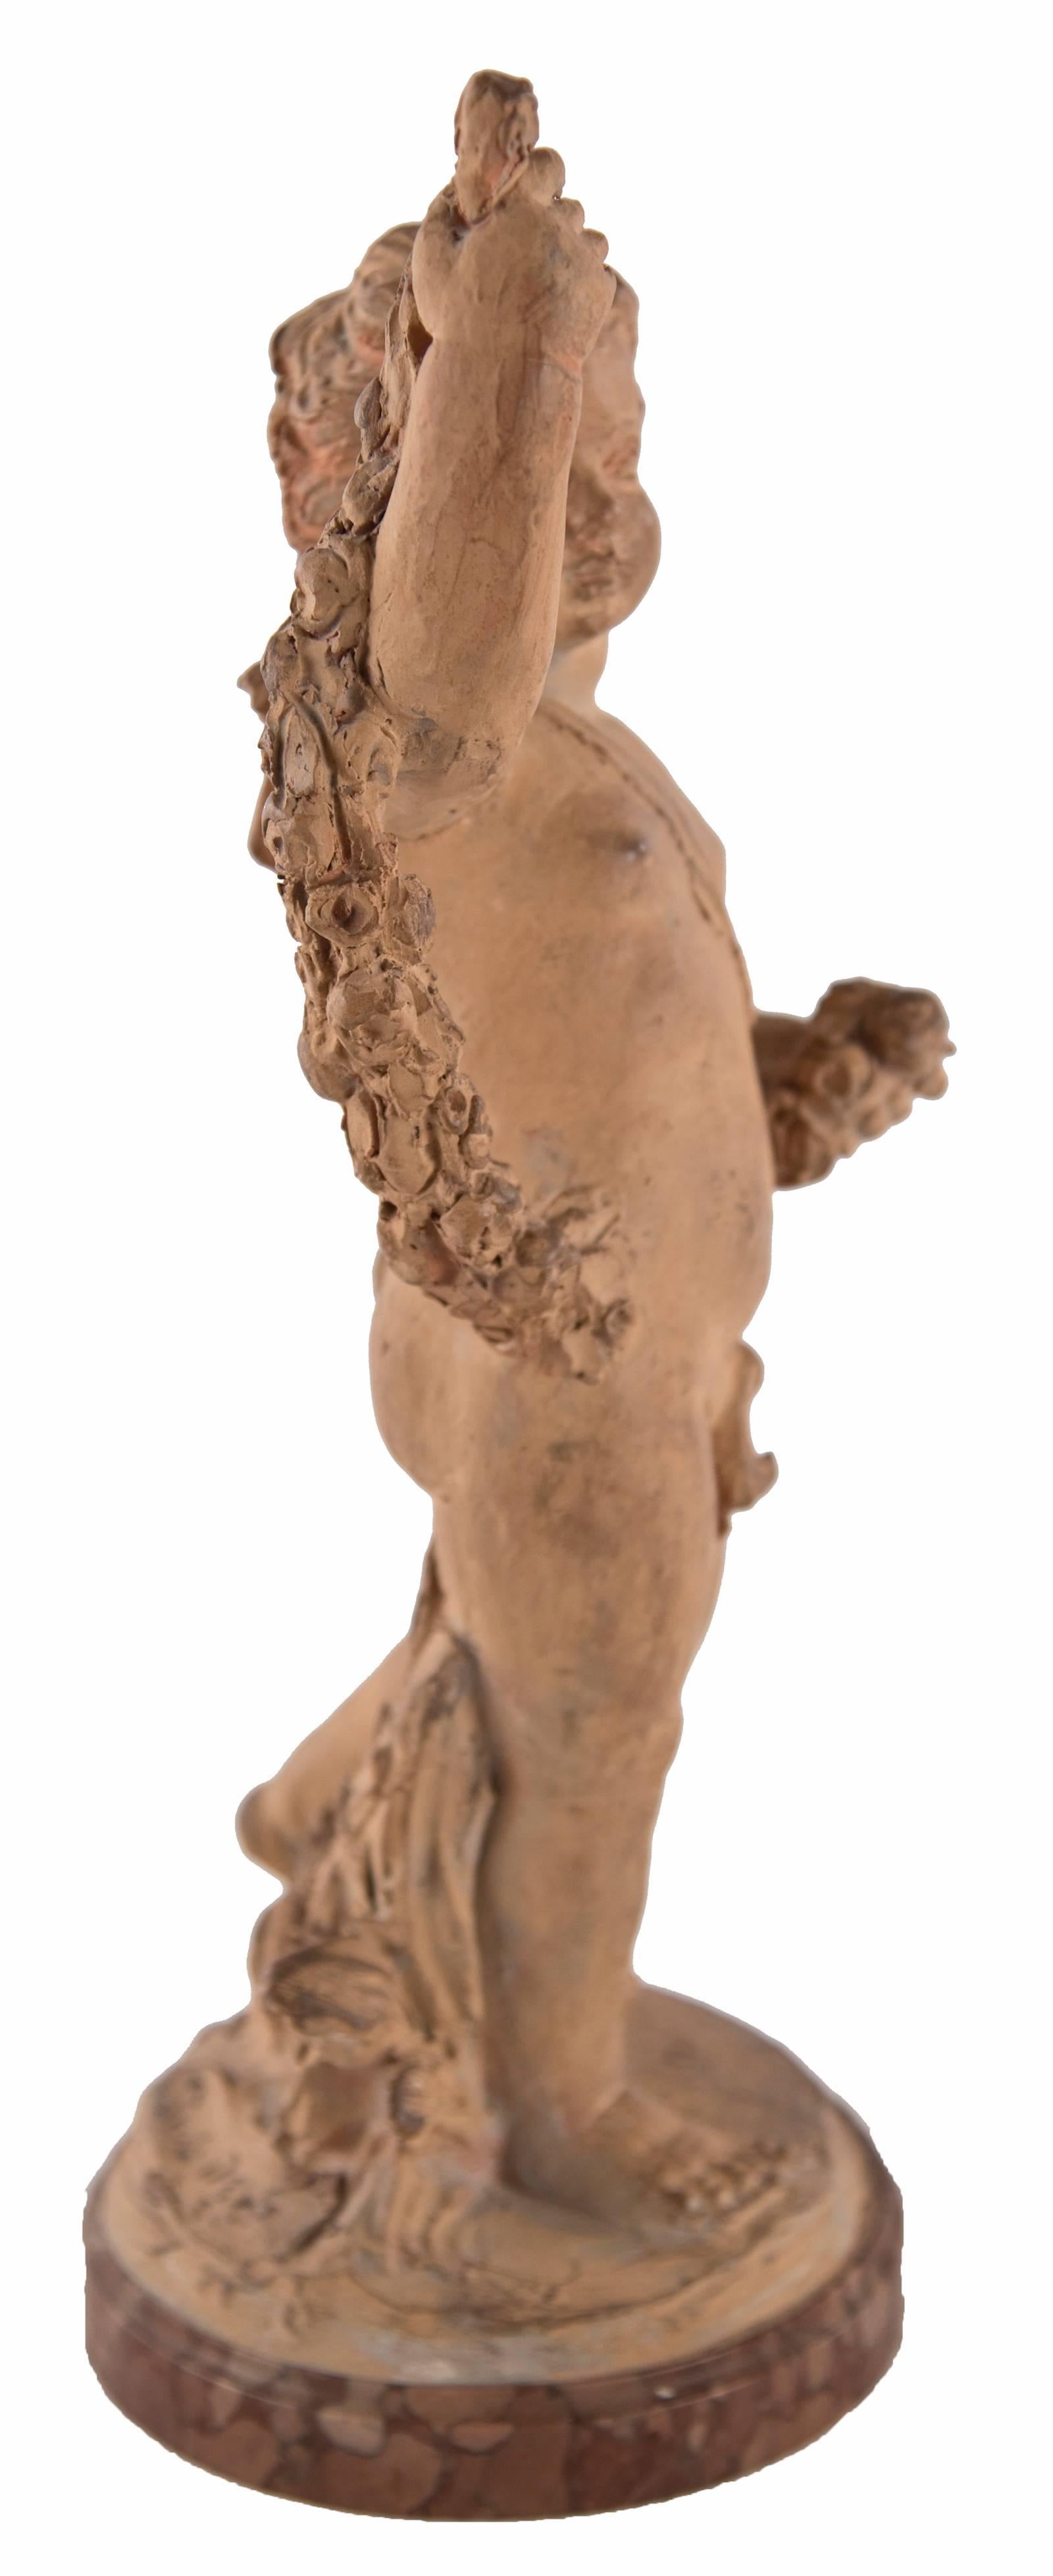 A terracotta figure in the form of a cherub, arm raised with floral garland on a round marble base. The organic, free-formed figure may be a preparatory study for a larger sculptural piece.

Base inscribed "Paris 1735".
 